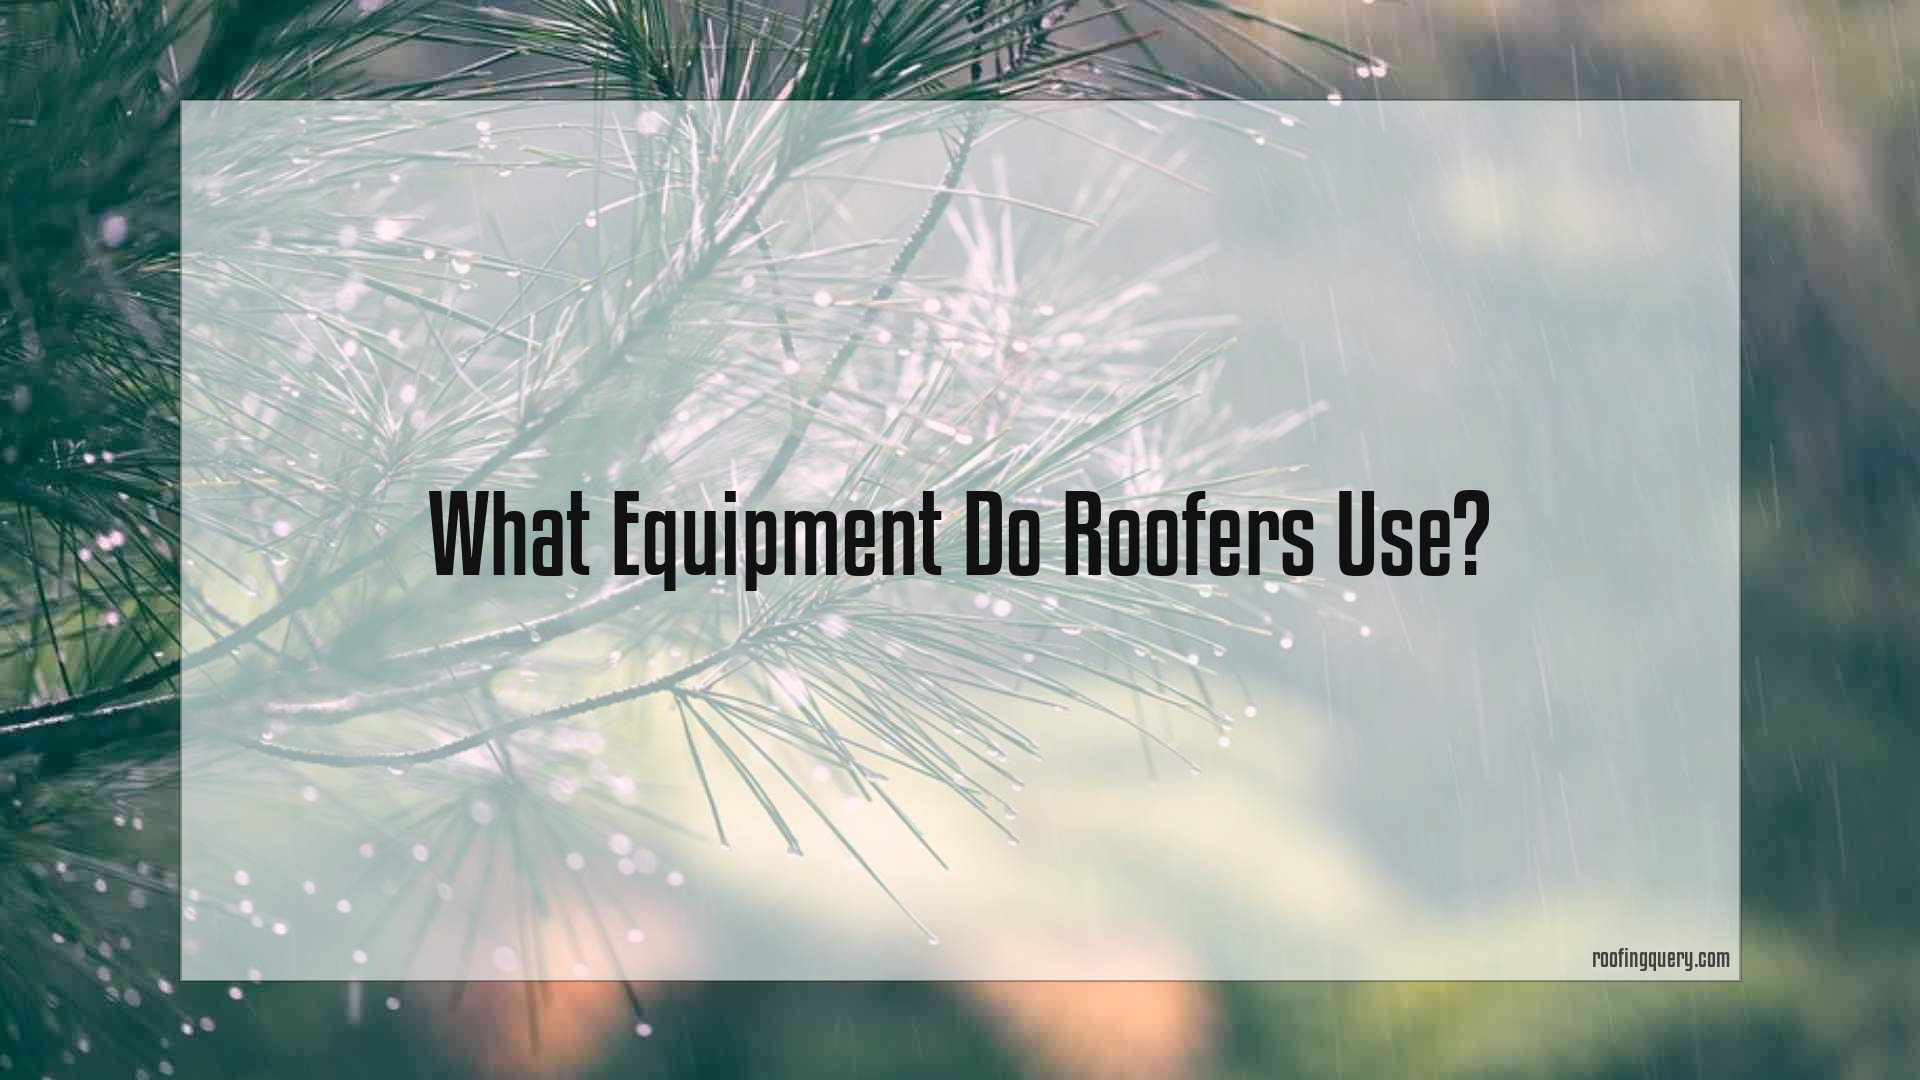 What Equipment Do Roofers Use